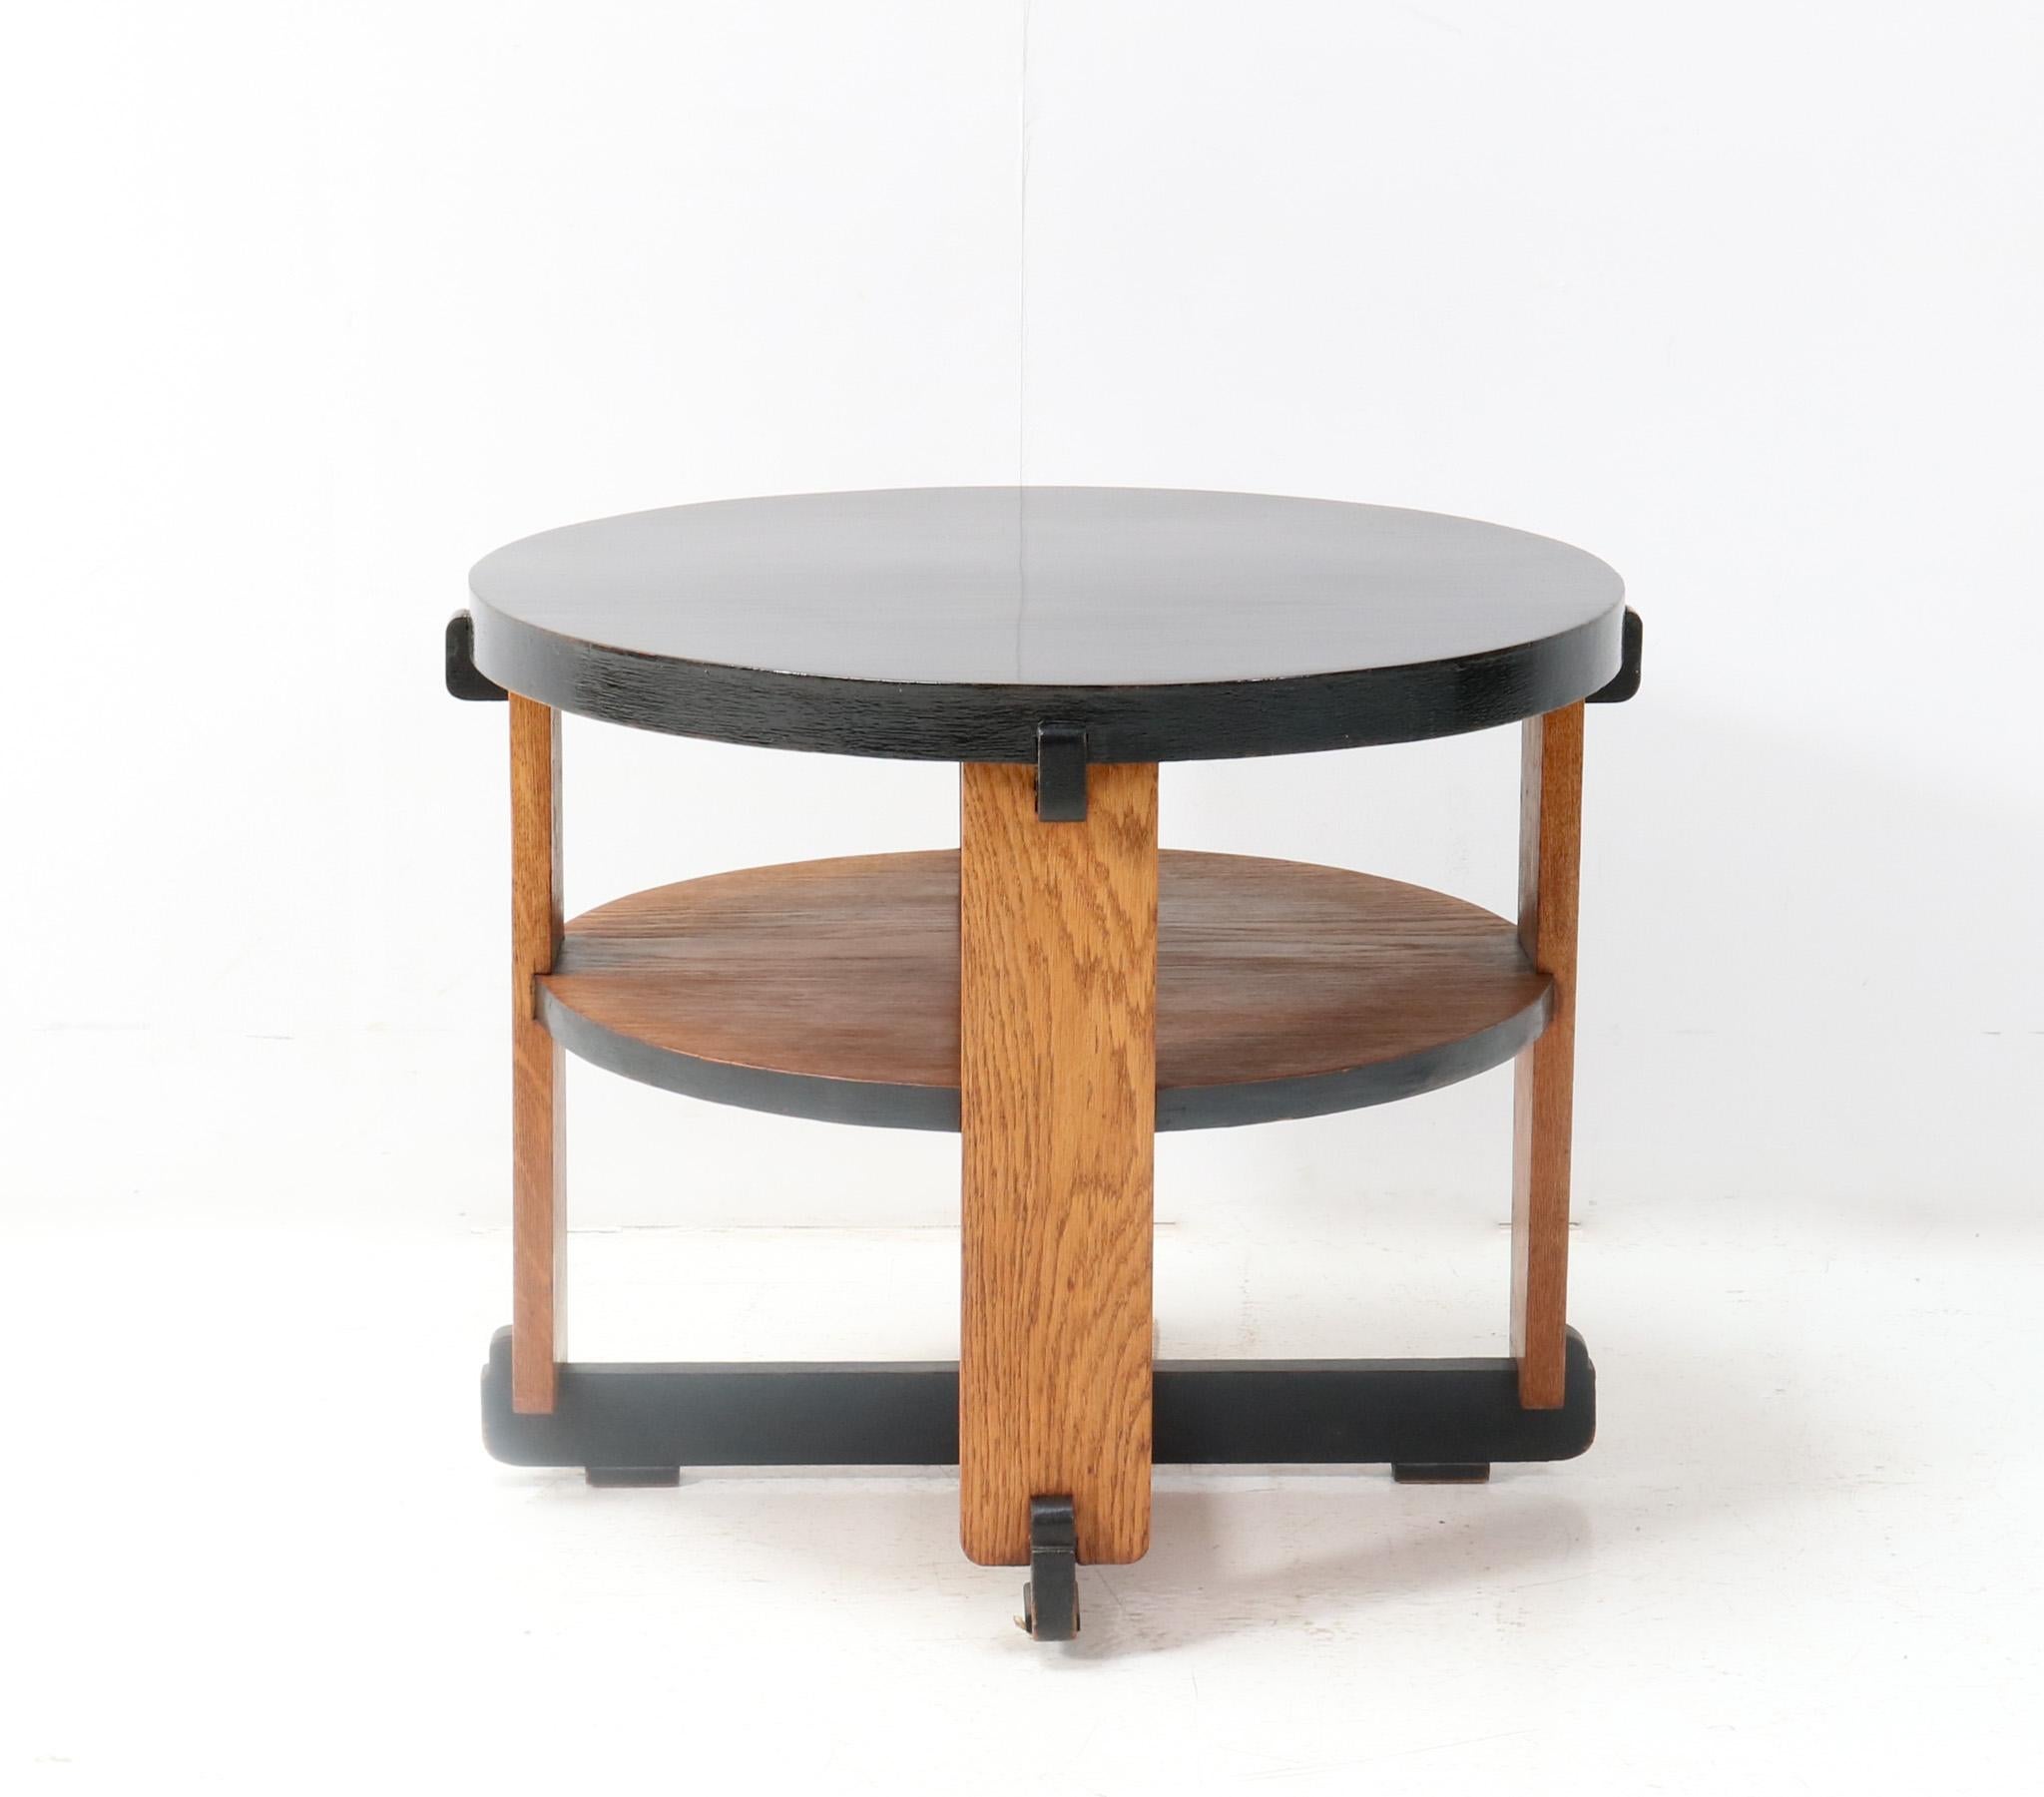 Stunning and rare Art Deco Modernist side table.
Design by Jan Brunott.
Striking Dutch design from the 1920s.
Solid oak base with original black lacquered oak veneered top.
In very good original condition with minor wear consistent with age and use,